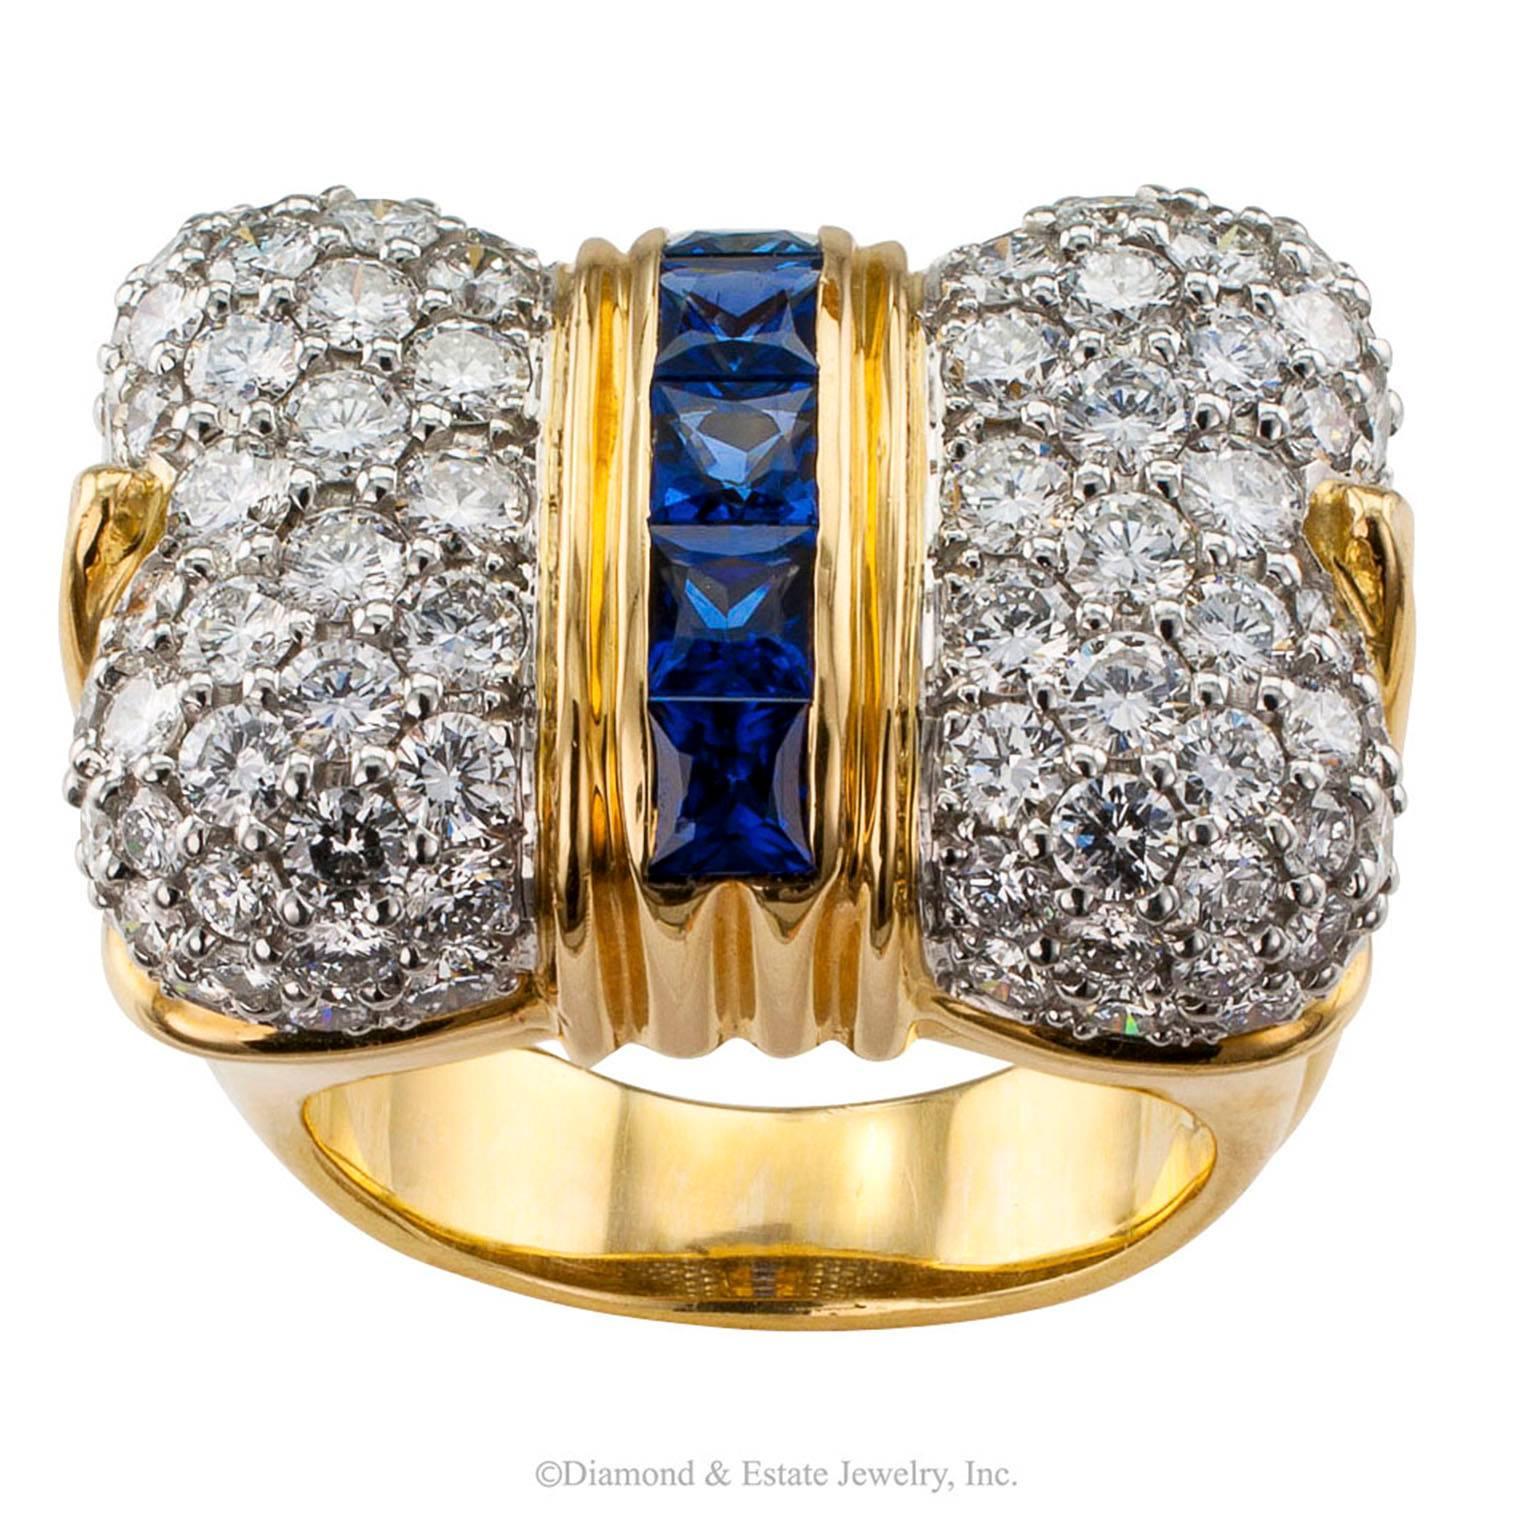 1980s Bow Ring Diamond Sapphire Gold Platinum

1980s bow ring set with diamonds and sapphires mounted in 18-karat gold and platinum.  Slightly bombe and pave set with ninety round brilliant-cut diamonds totaling approximately 3.00